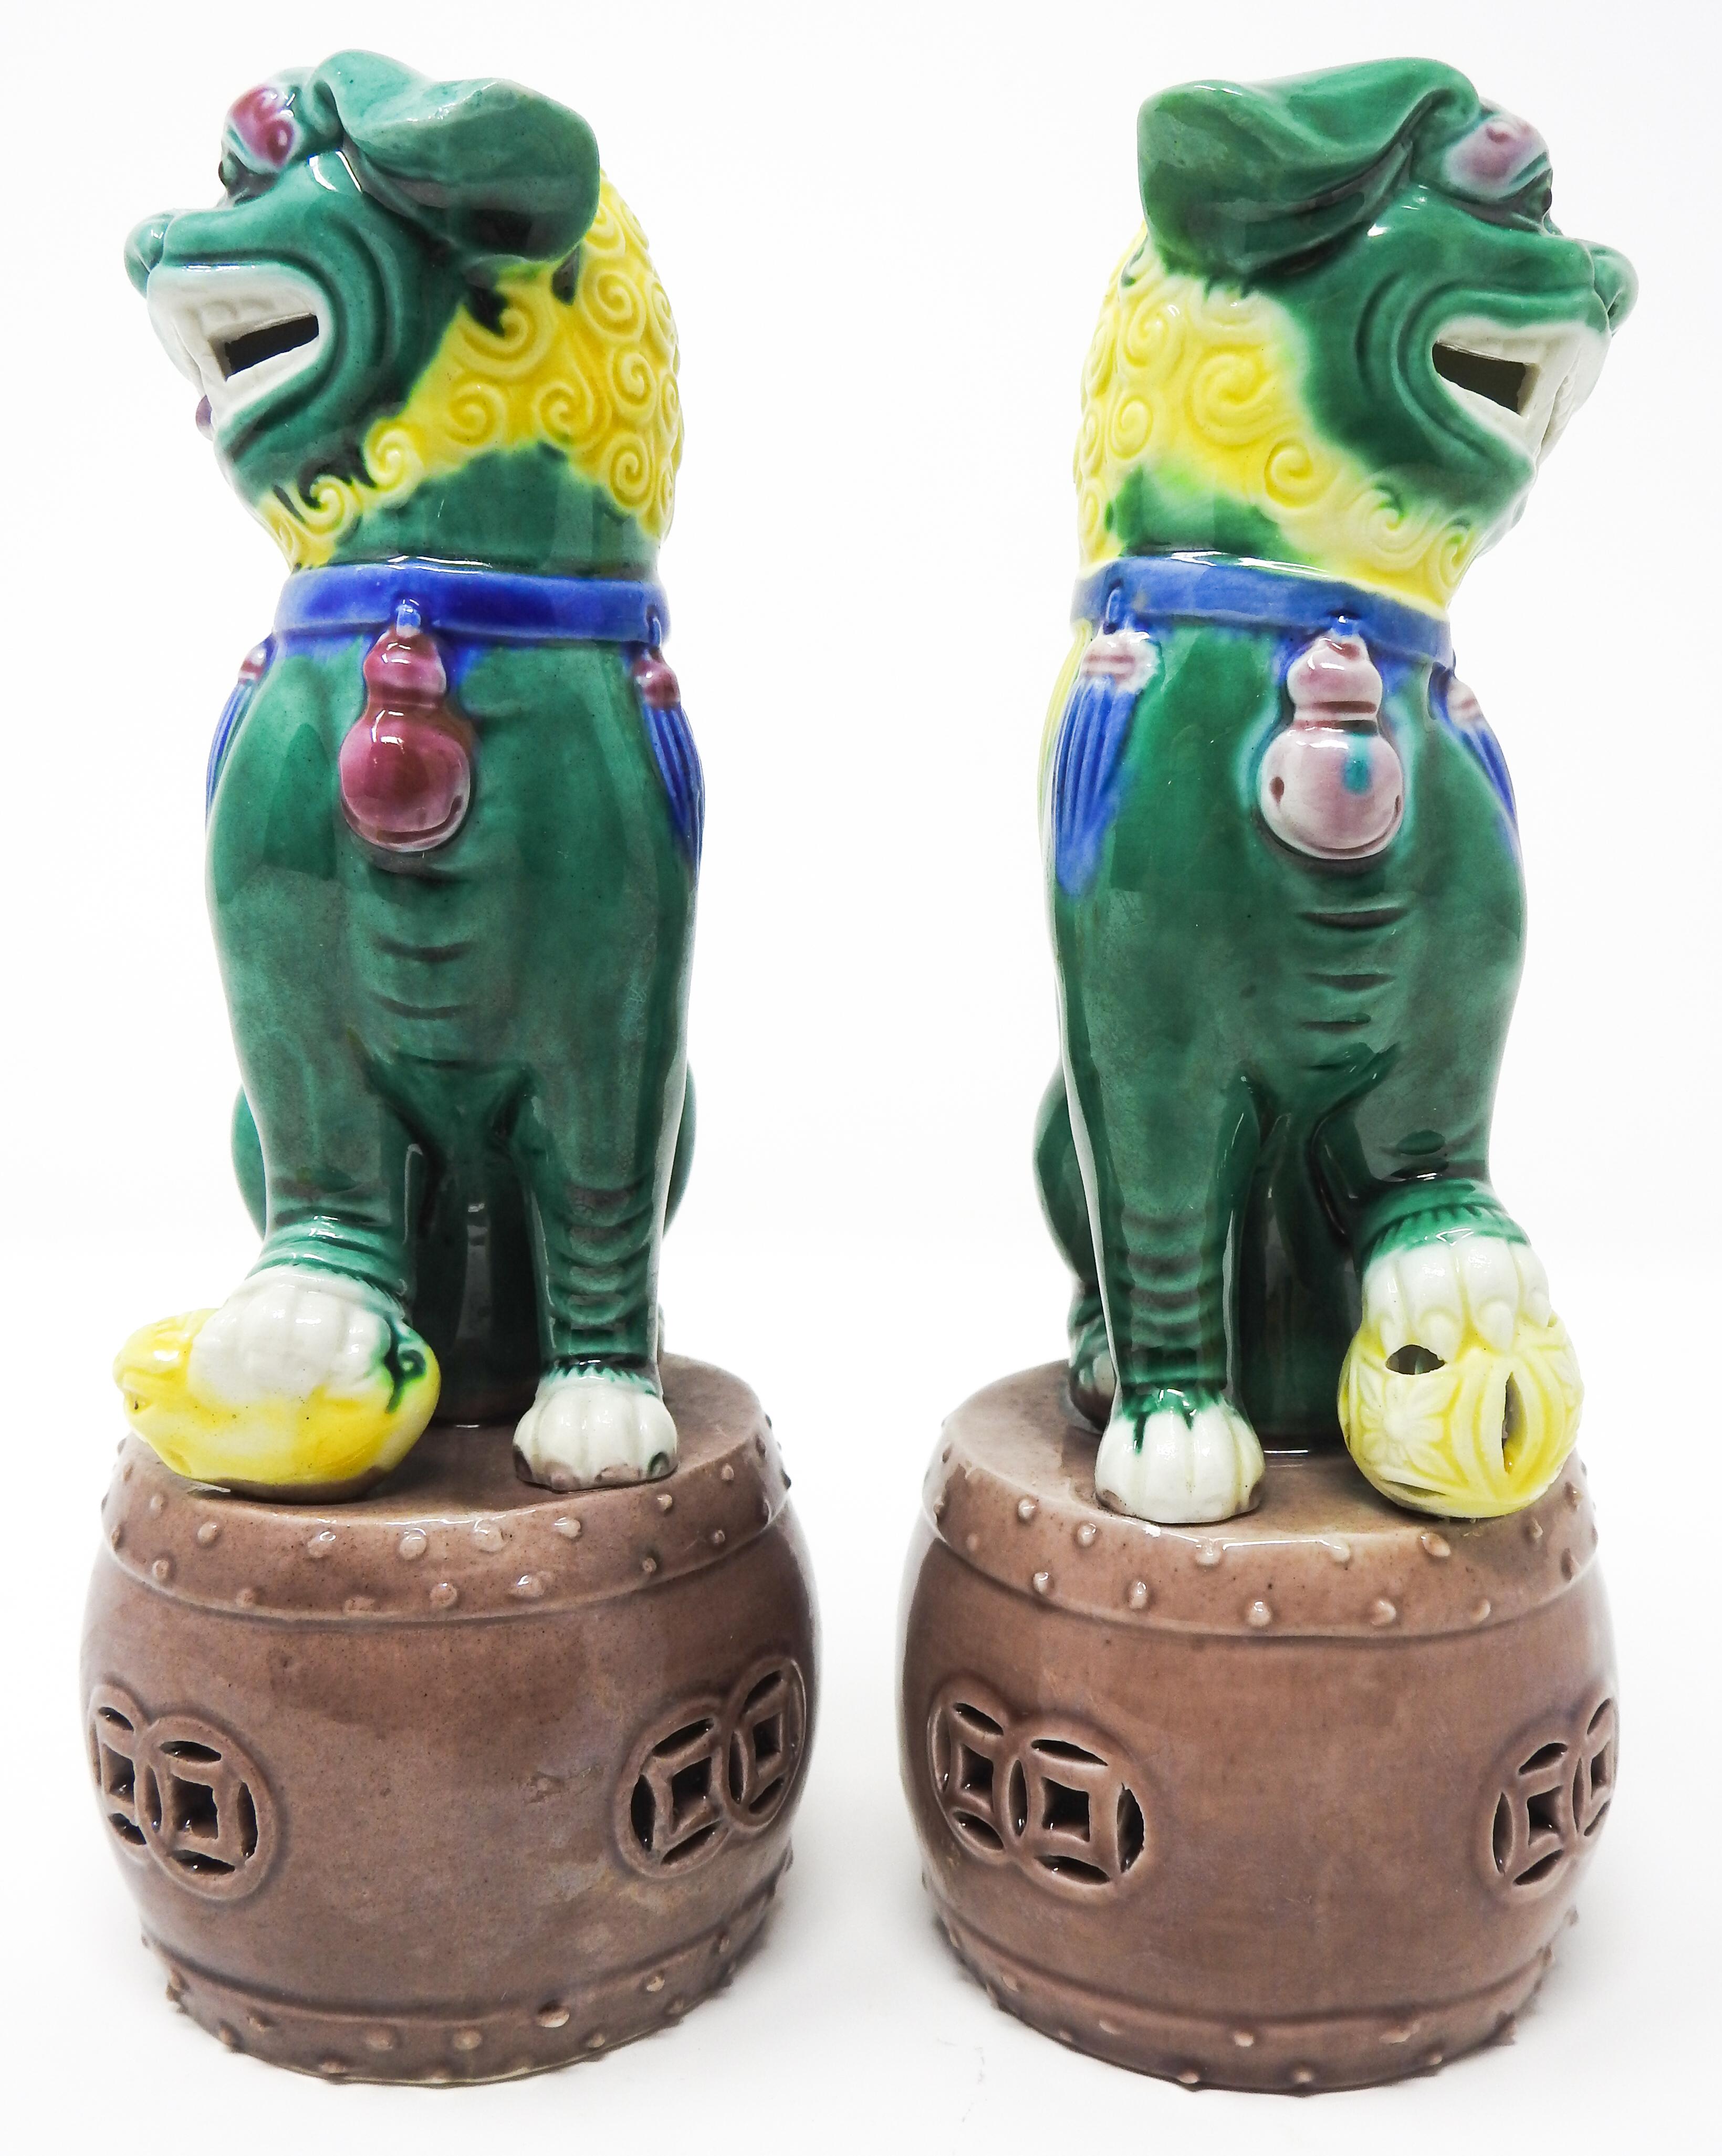 Ceramic Chinese Guardian Foo Dogs In Good Condition For Sale In Cookeville, TN